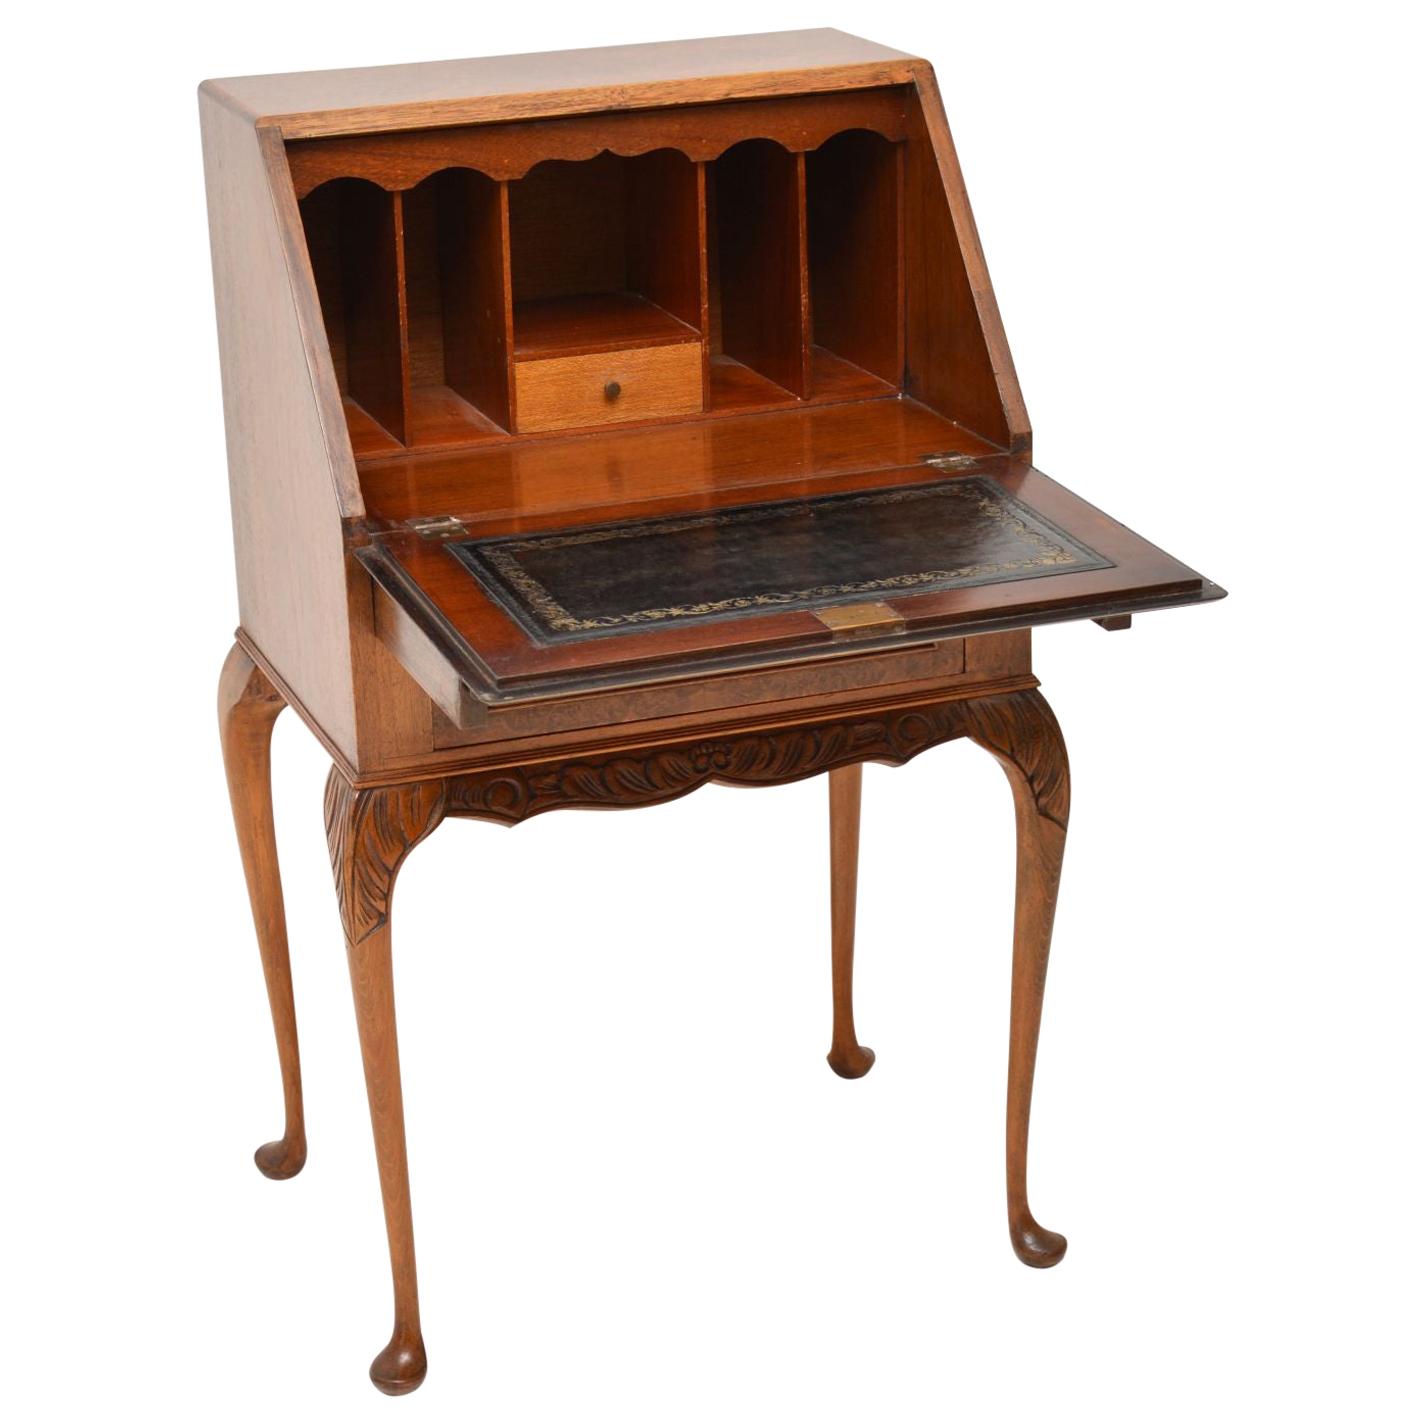 Small antique Queen Anne style burr walnut bureau in lovely condition with a nice warm color and dating from circa 1930s period. It has a pull down flap which rests on pullout / pull-out loafers. The inside has a tooled leather writing surface with